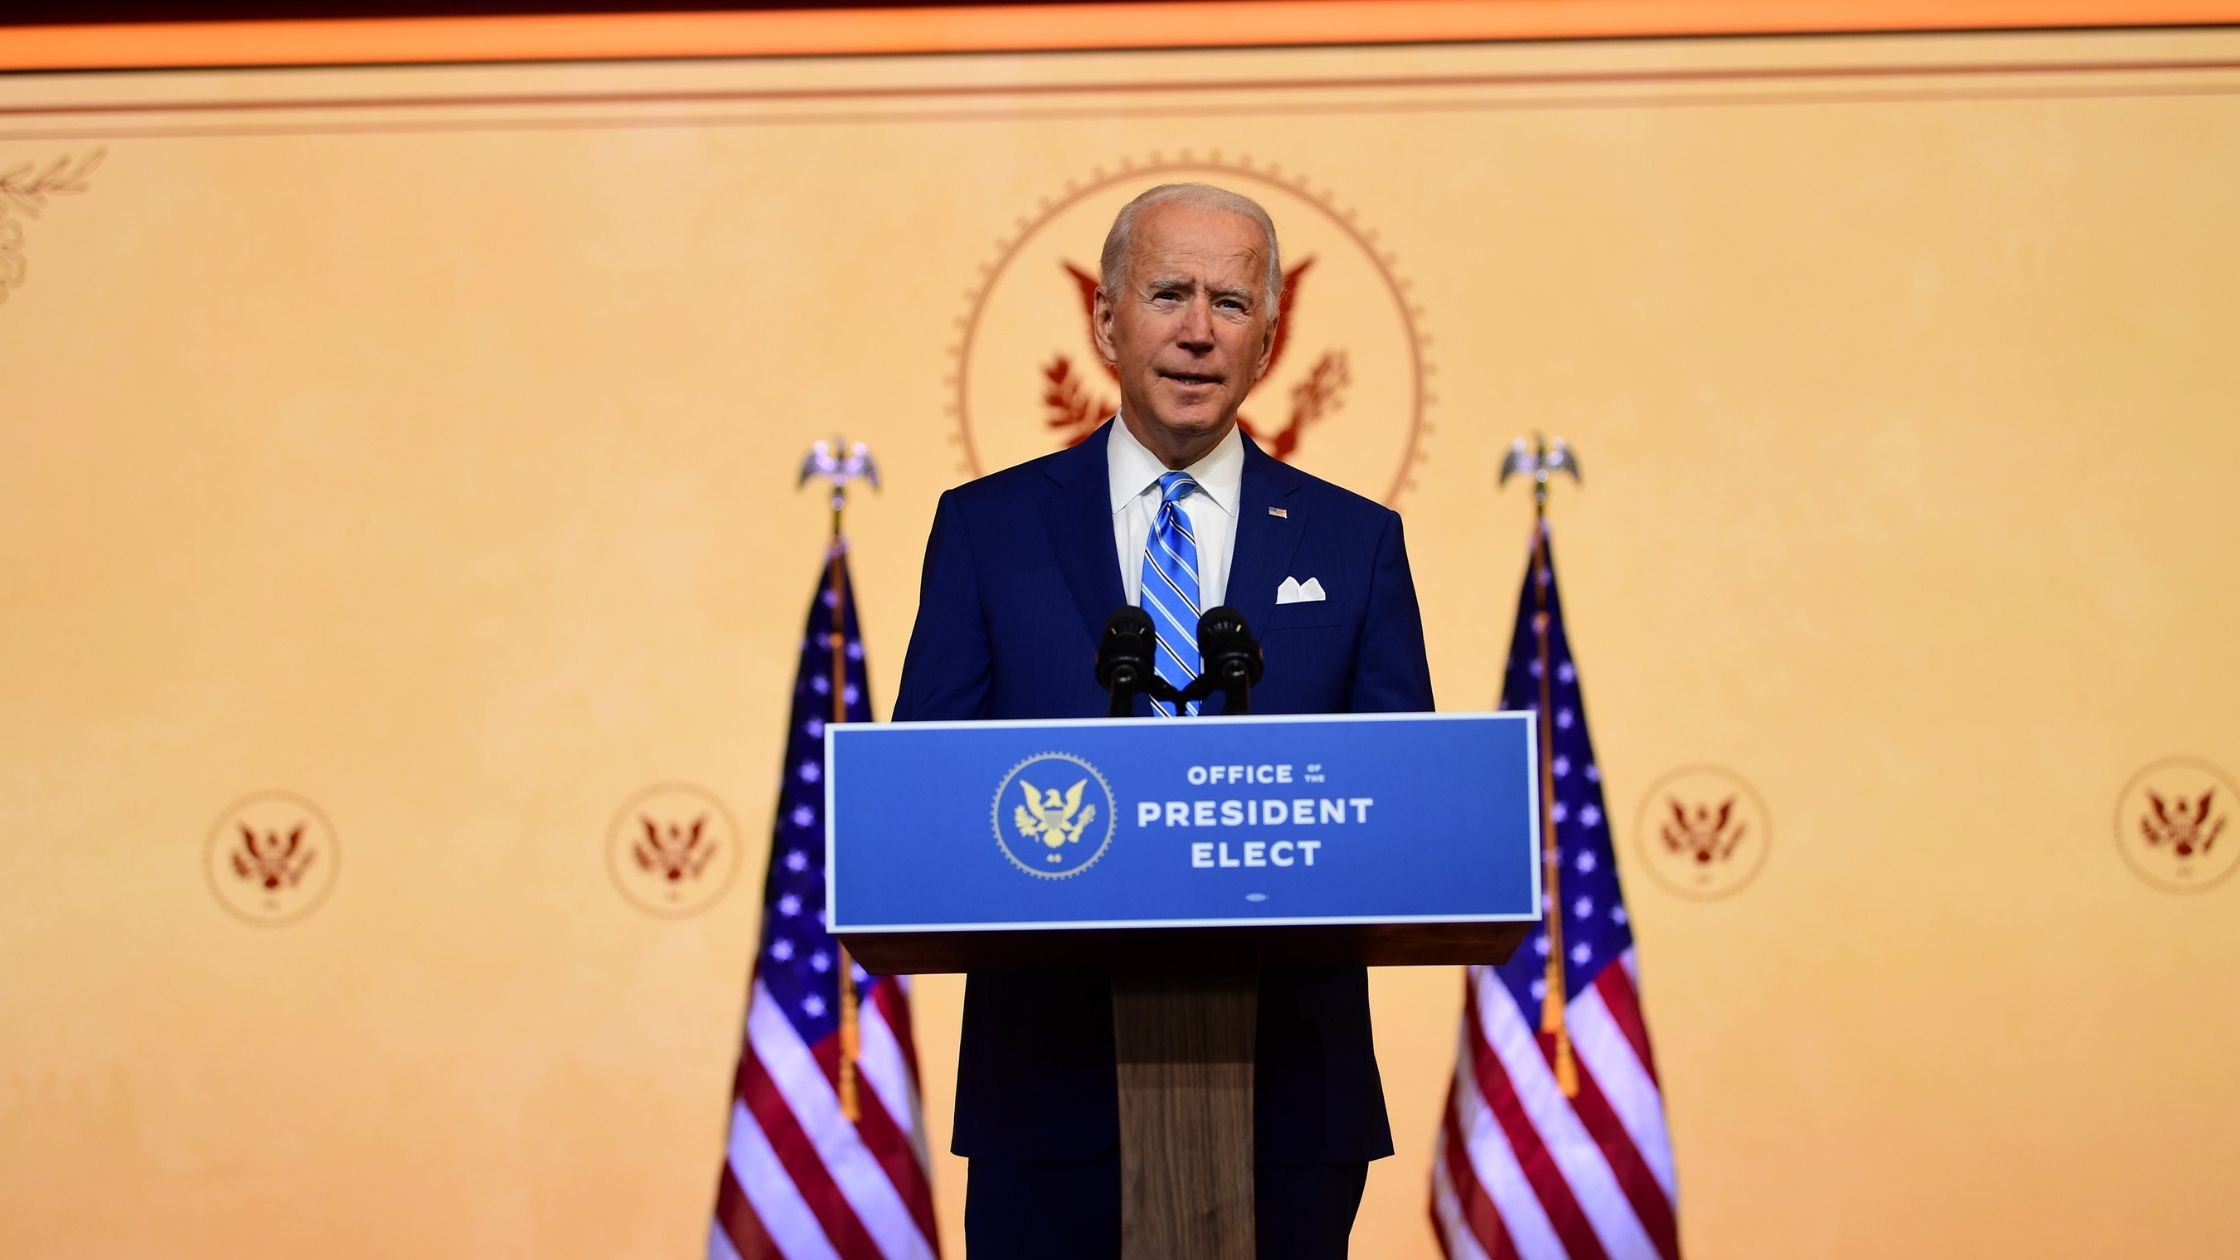 Presumed President-elect Joe Biden delivers a Thanksgiving address at the Queen Theatre on November 25, 2020 in Wilmington, Delaware.